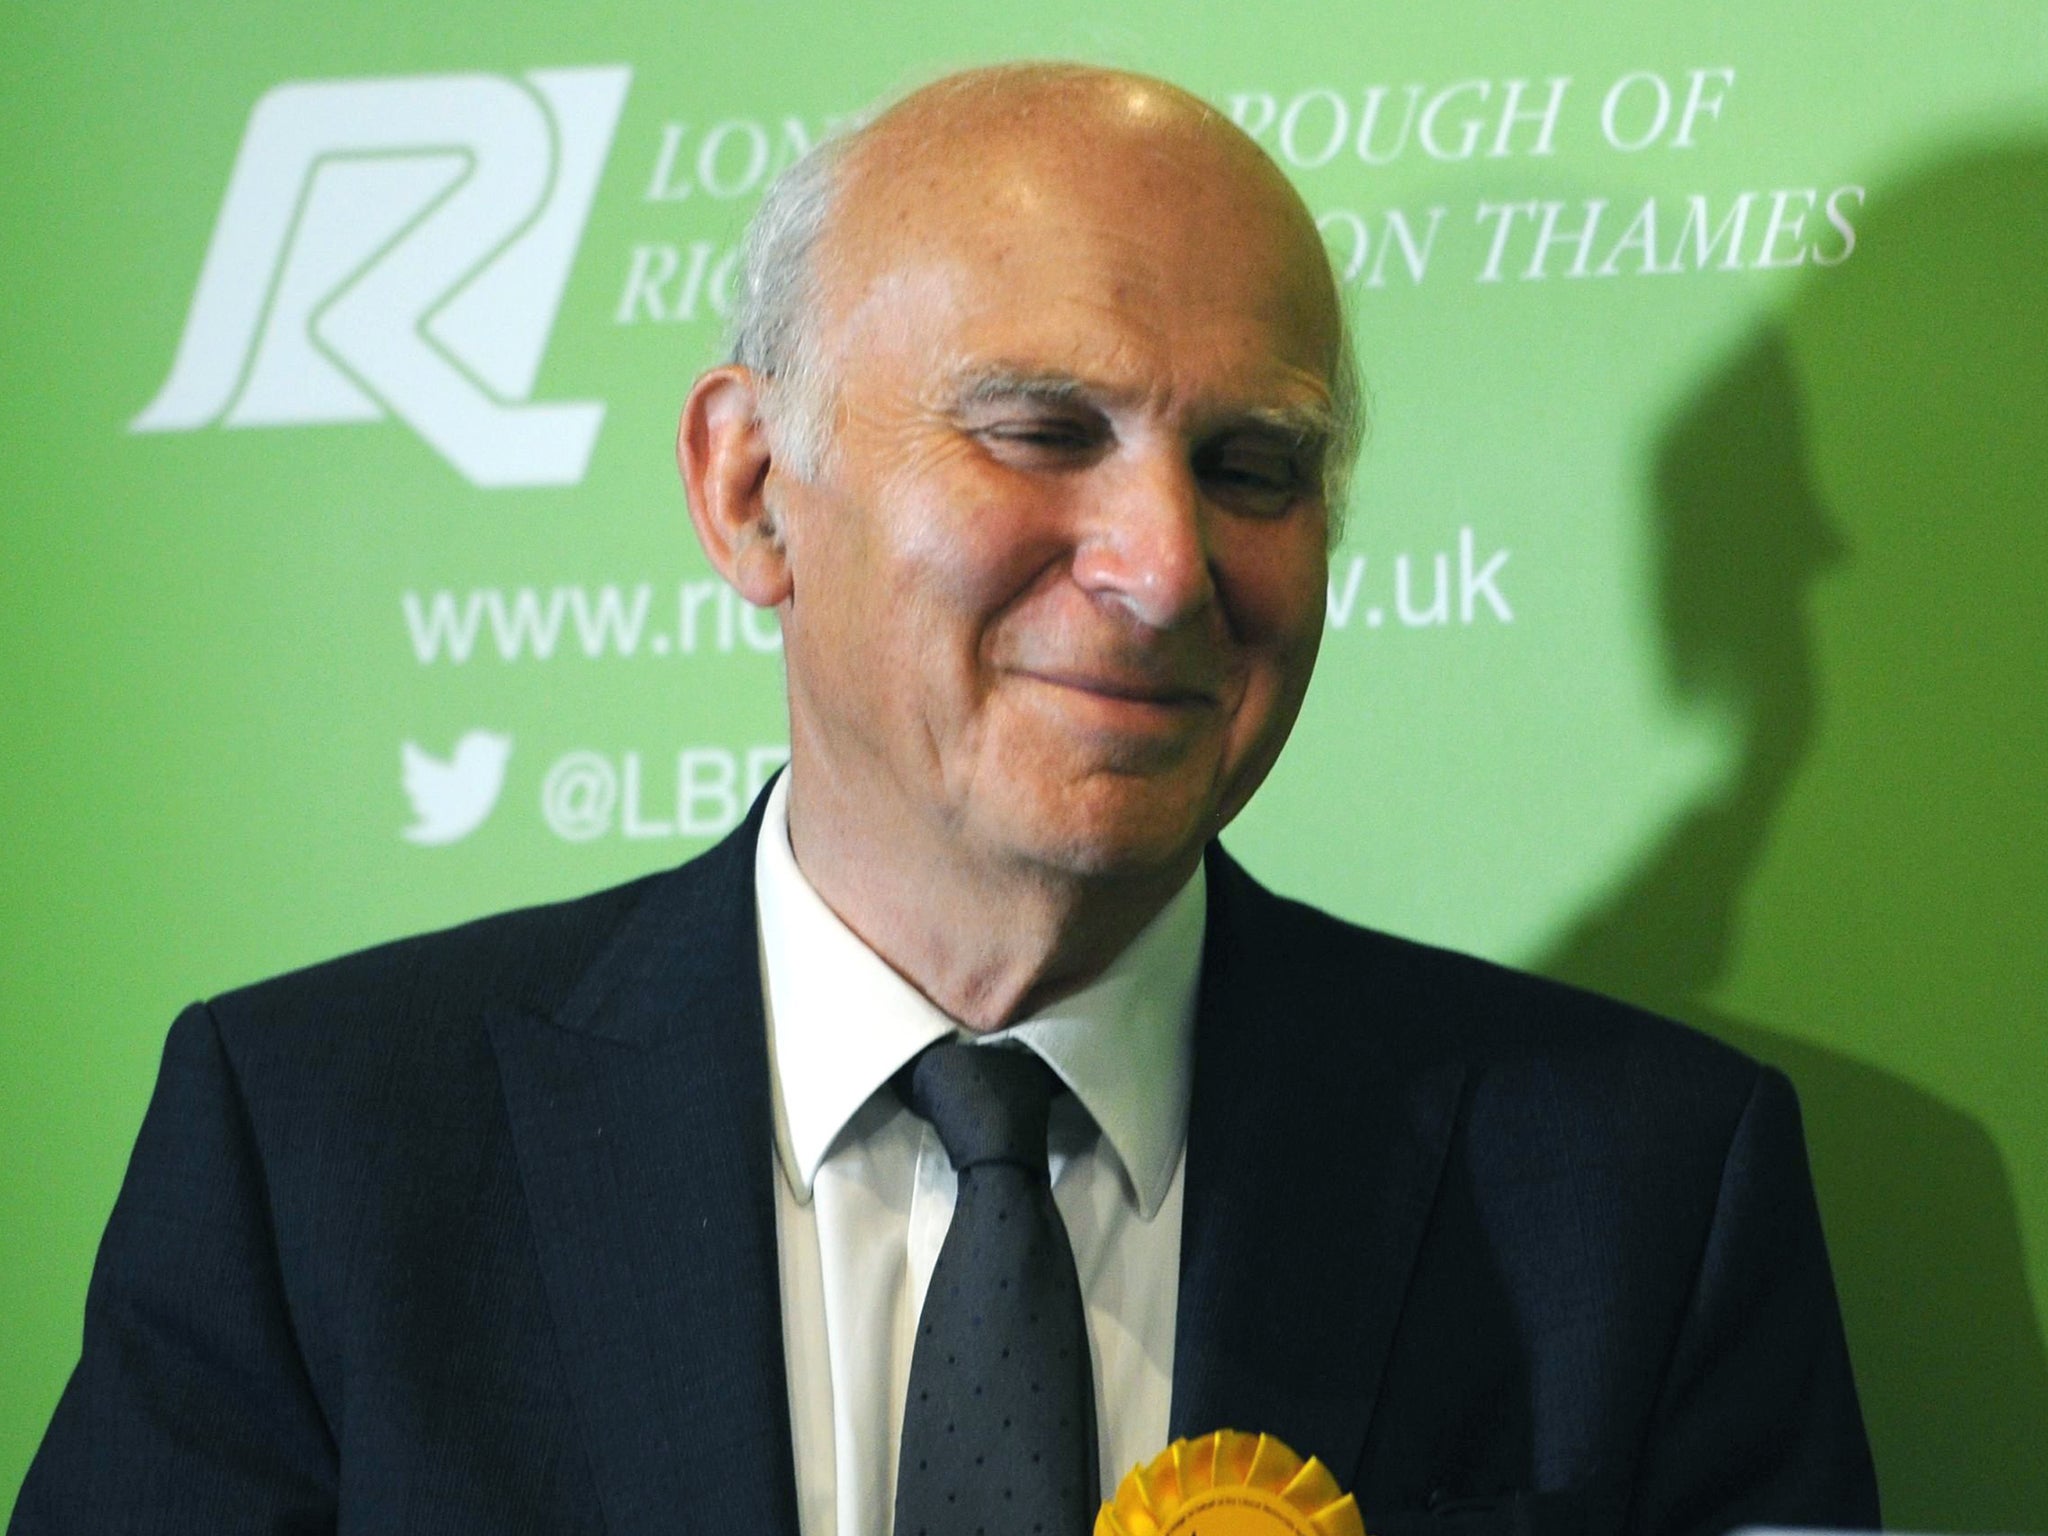 Sir Vince Cable is making a return to Parliament, after winning back his seat in Twickenham for the Liberal Democrats